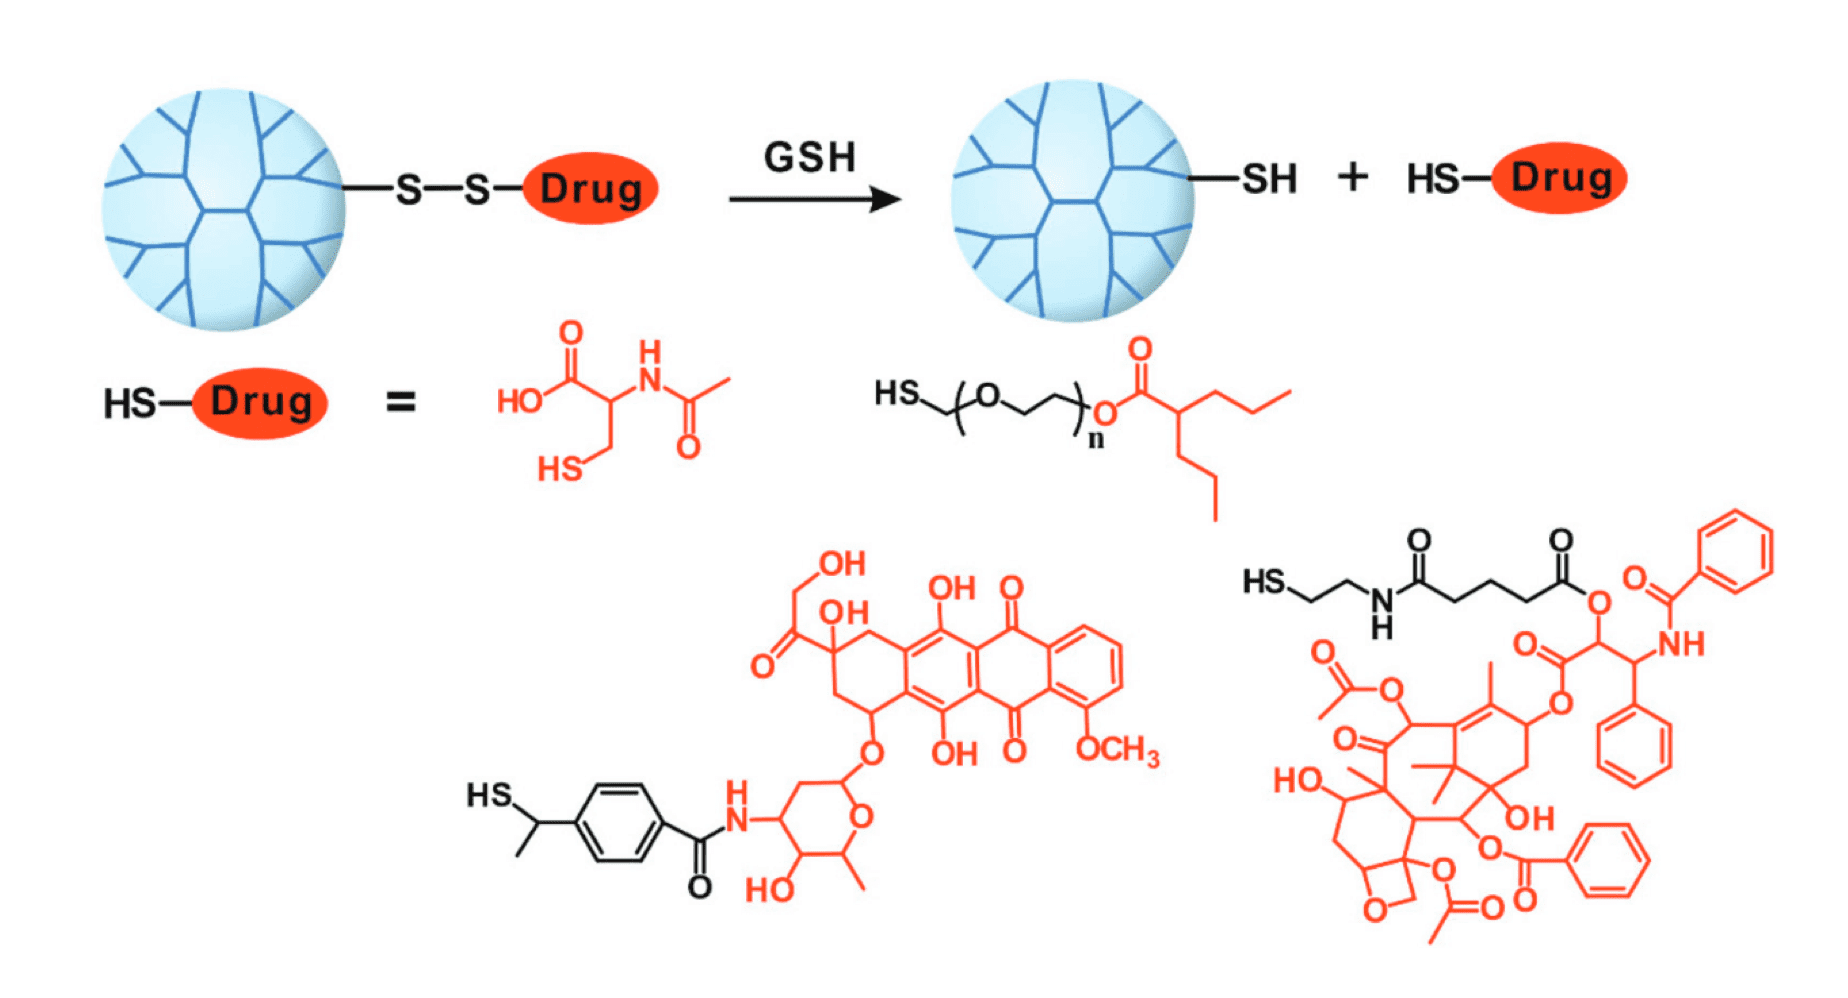 Schematic representation of  dendrimer-drug conjugate with a disulfide linker (Biomater. Sci., 2016).  The drugs used for this application include NAC, valproic acid, doxorubicin and  paclitaxel.